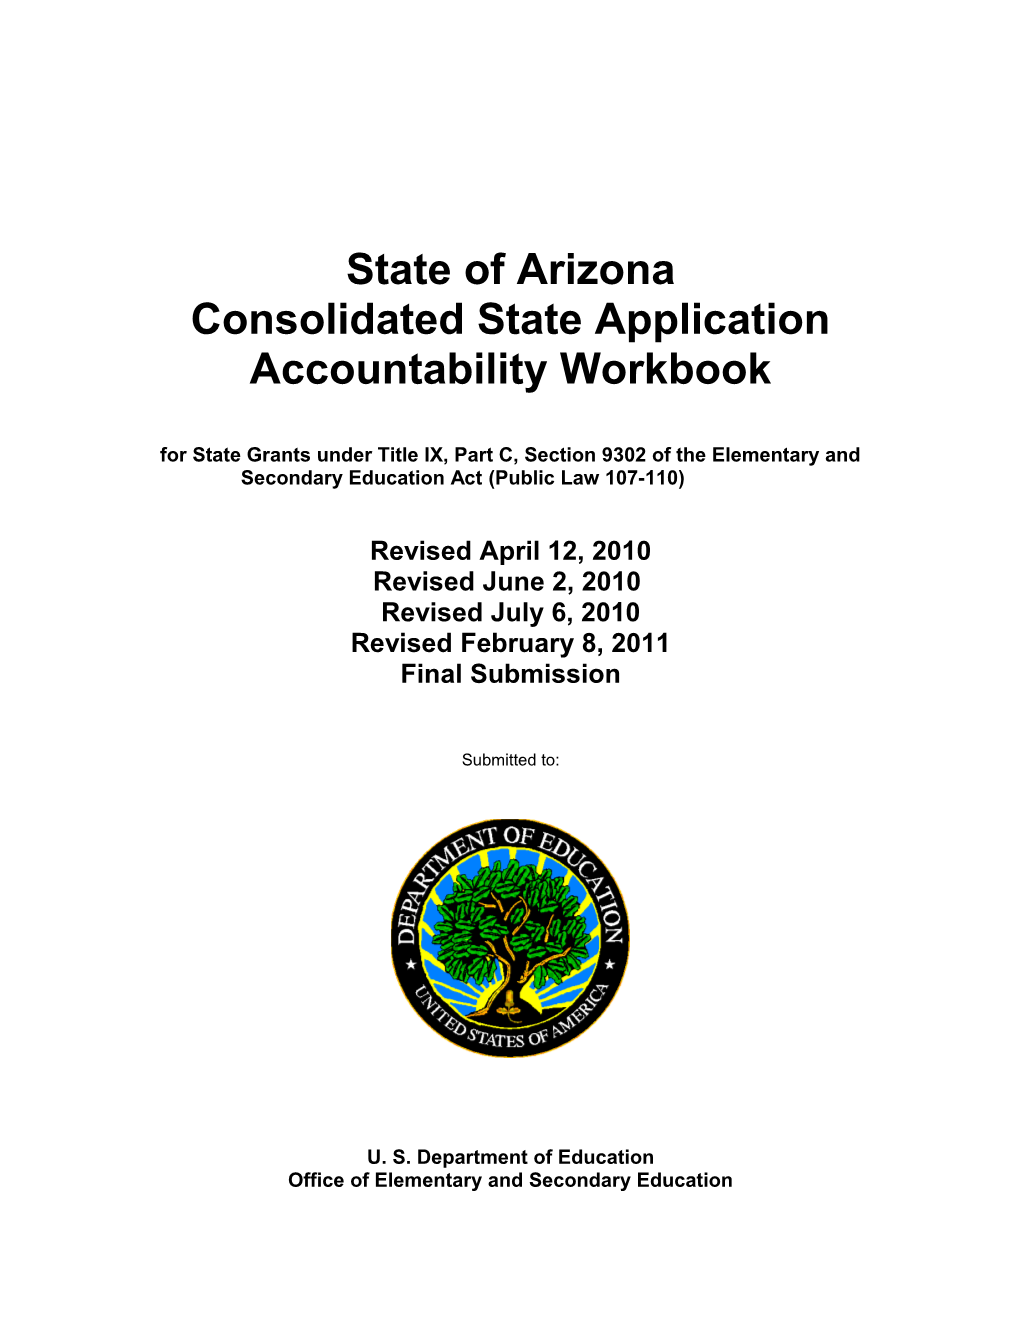 Arizona Consolidated State Application Accountability Workbook (MSWORD)